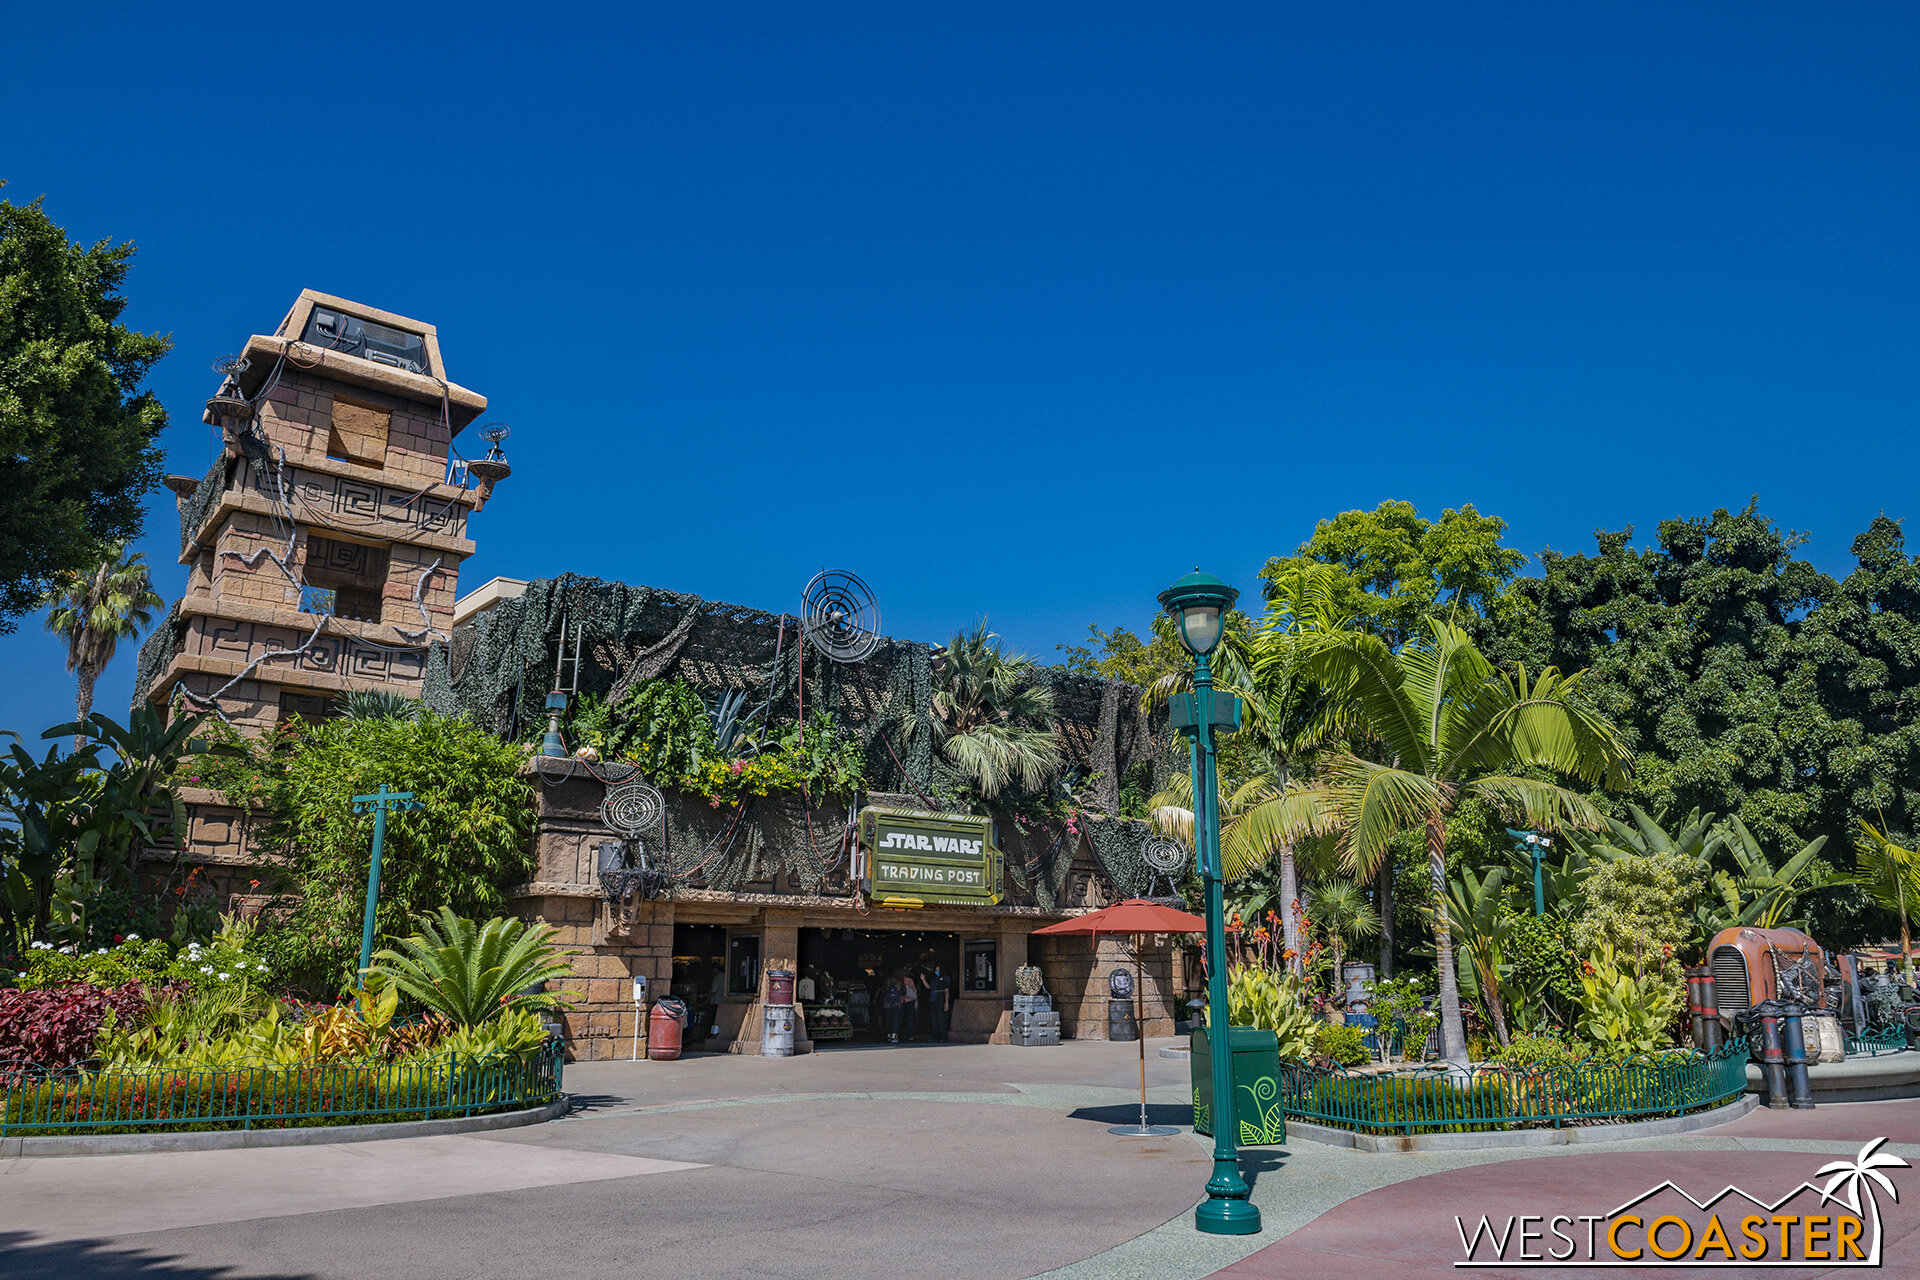  The old Rainforest Cafe gained a new tenant in the form of the Star Wars Trading Post, which had temporarily taken over the Wonderland Gallery for a few months before moving to this permanent location. 